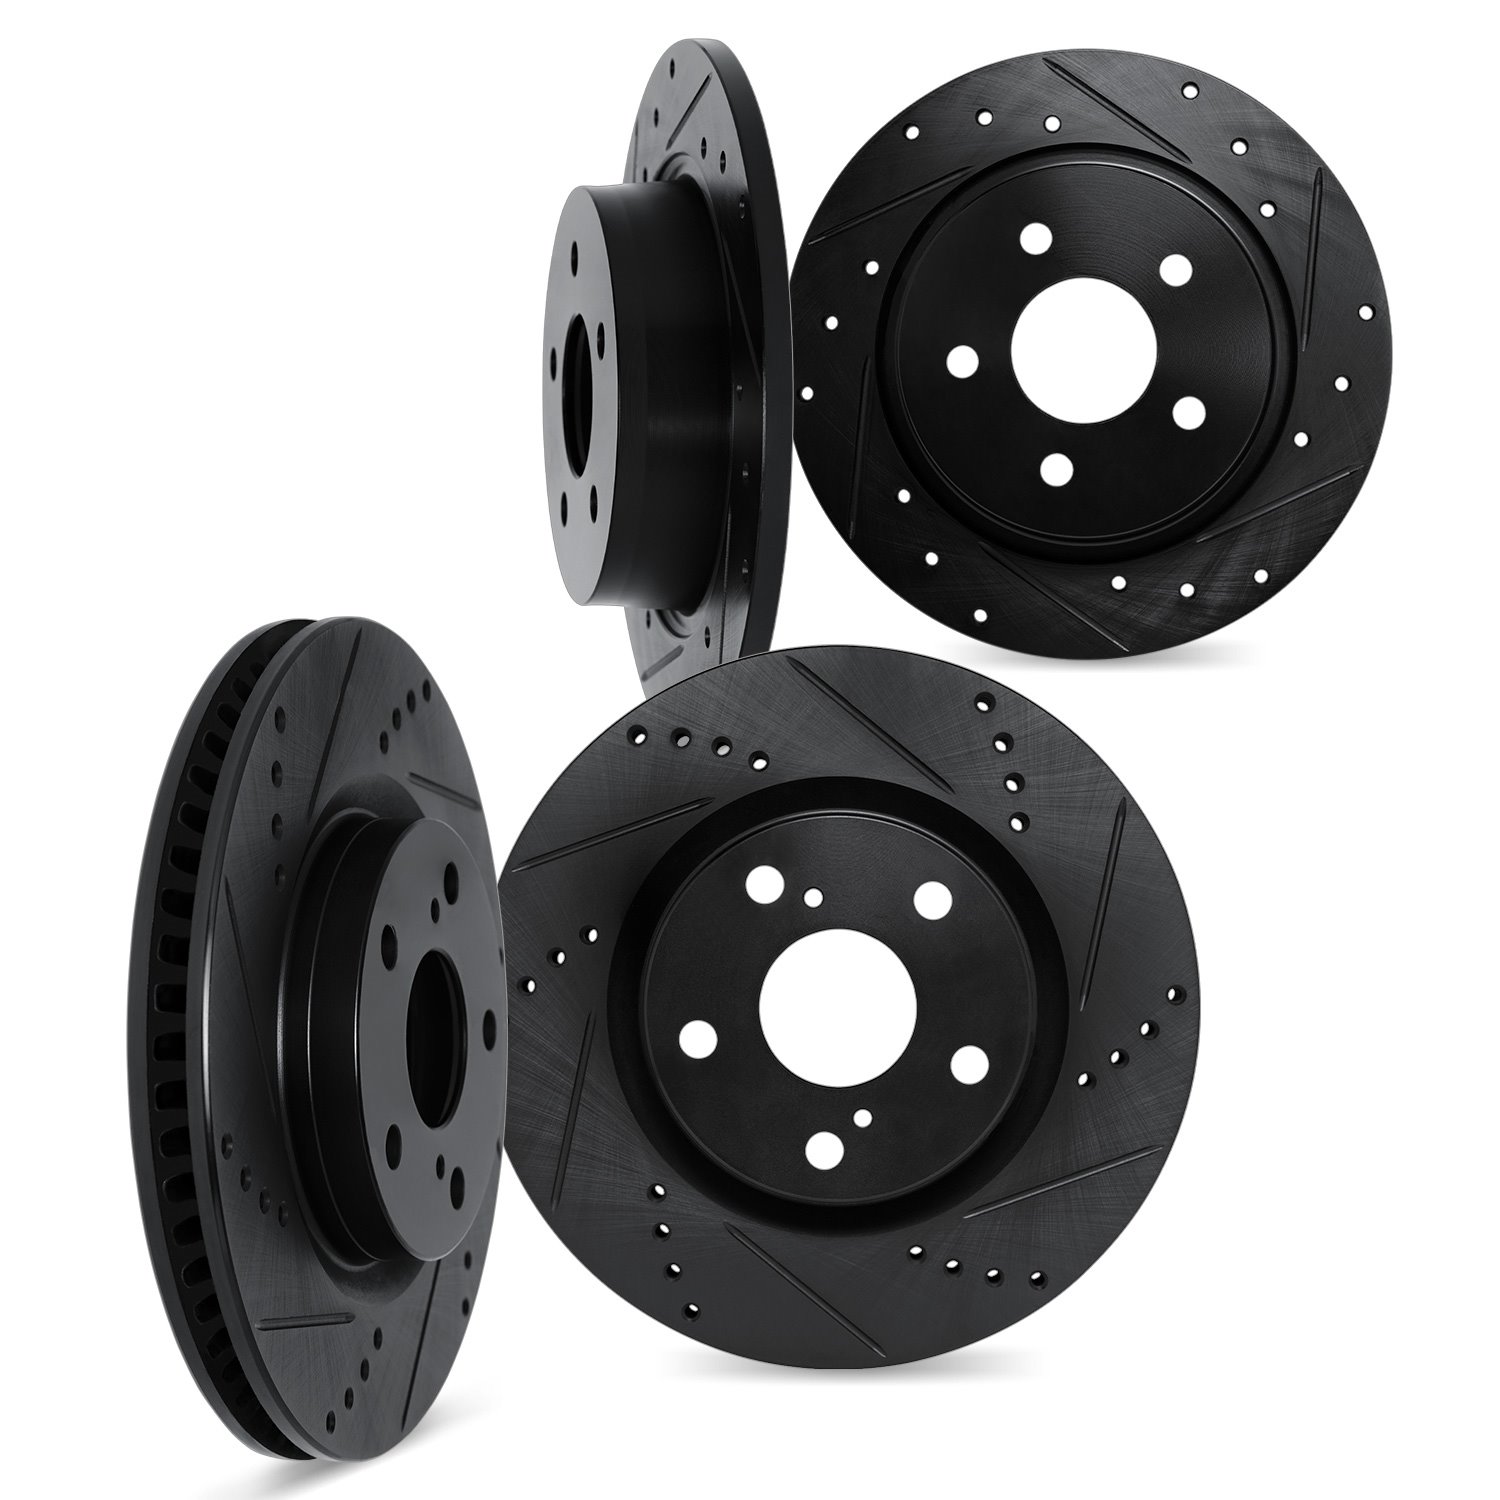 8004-59003 Drilled/Slotted Brake Rotors [Black], 2006-2015 Acura/Honda, Position: Front and Rear